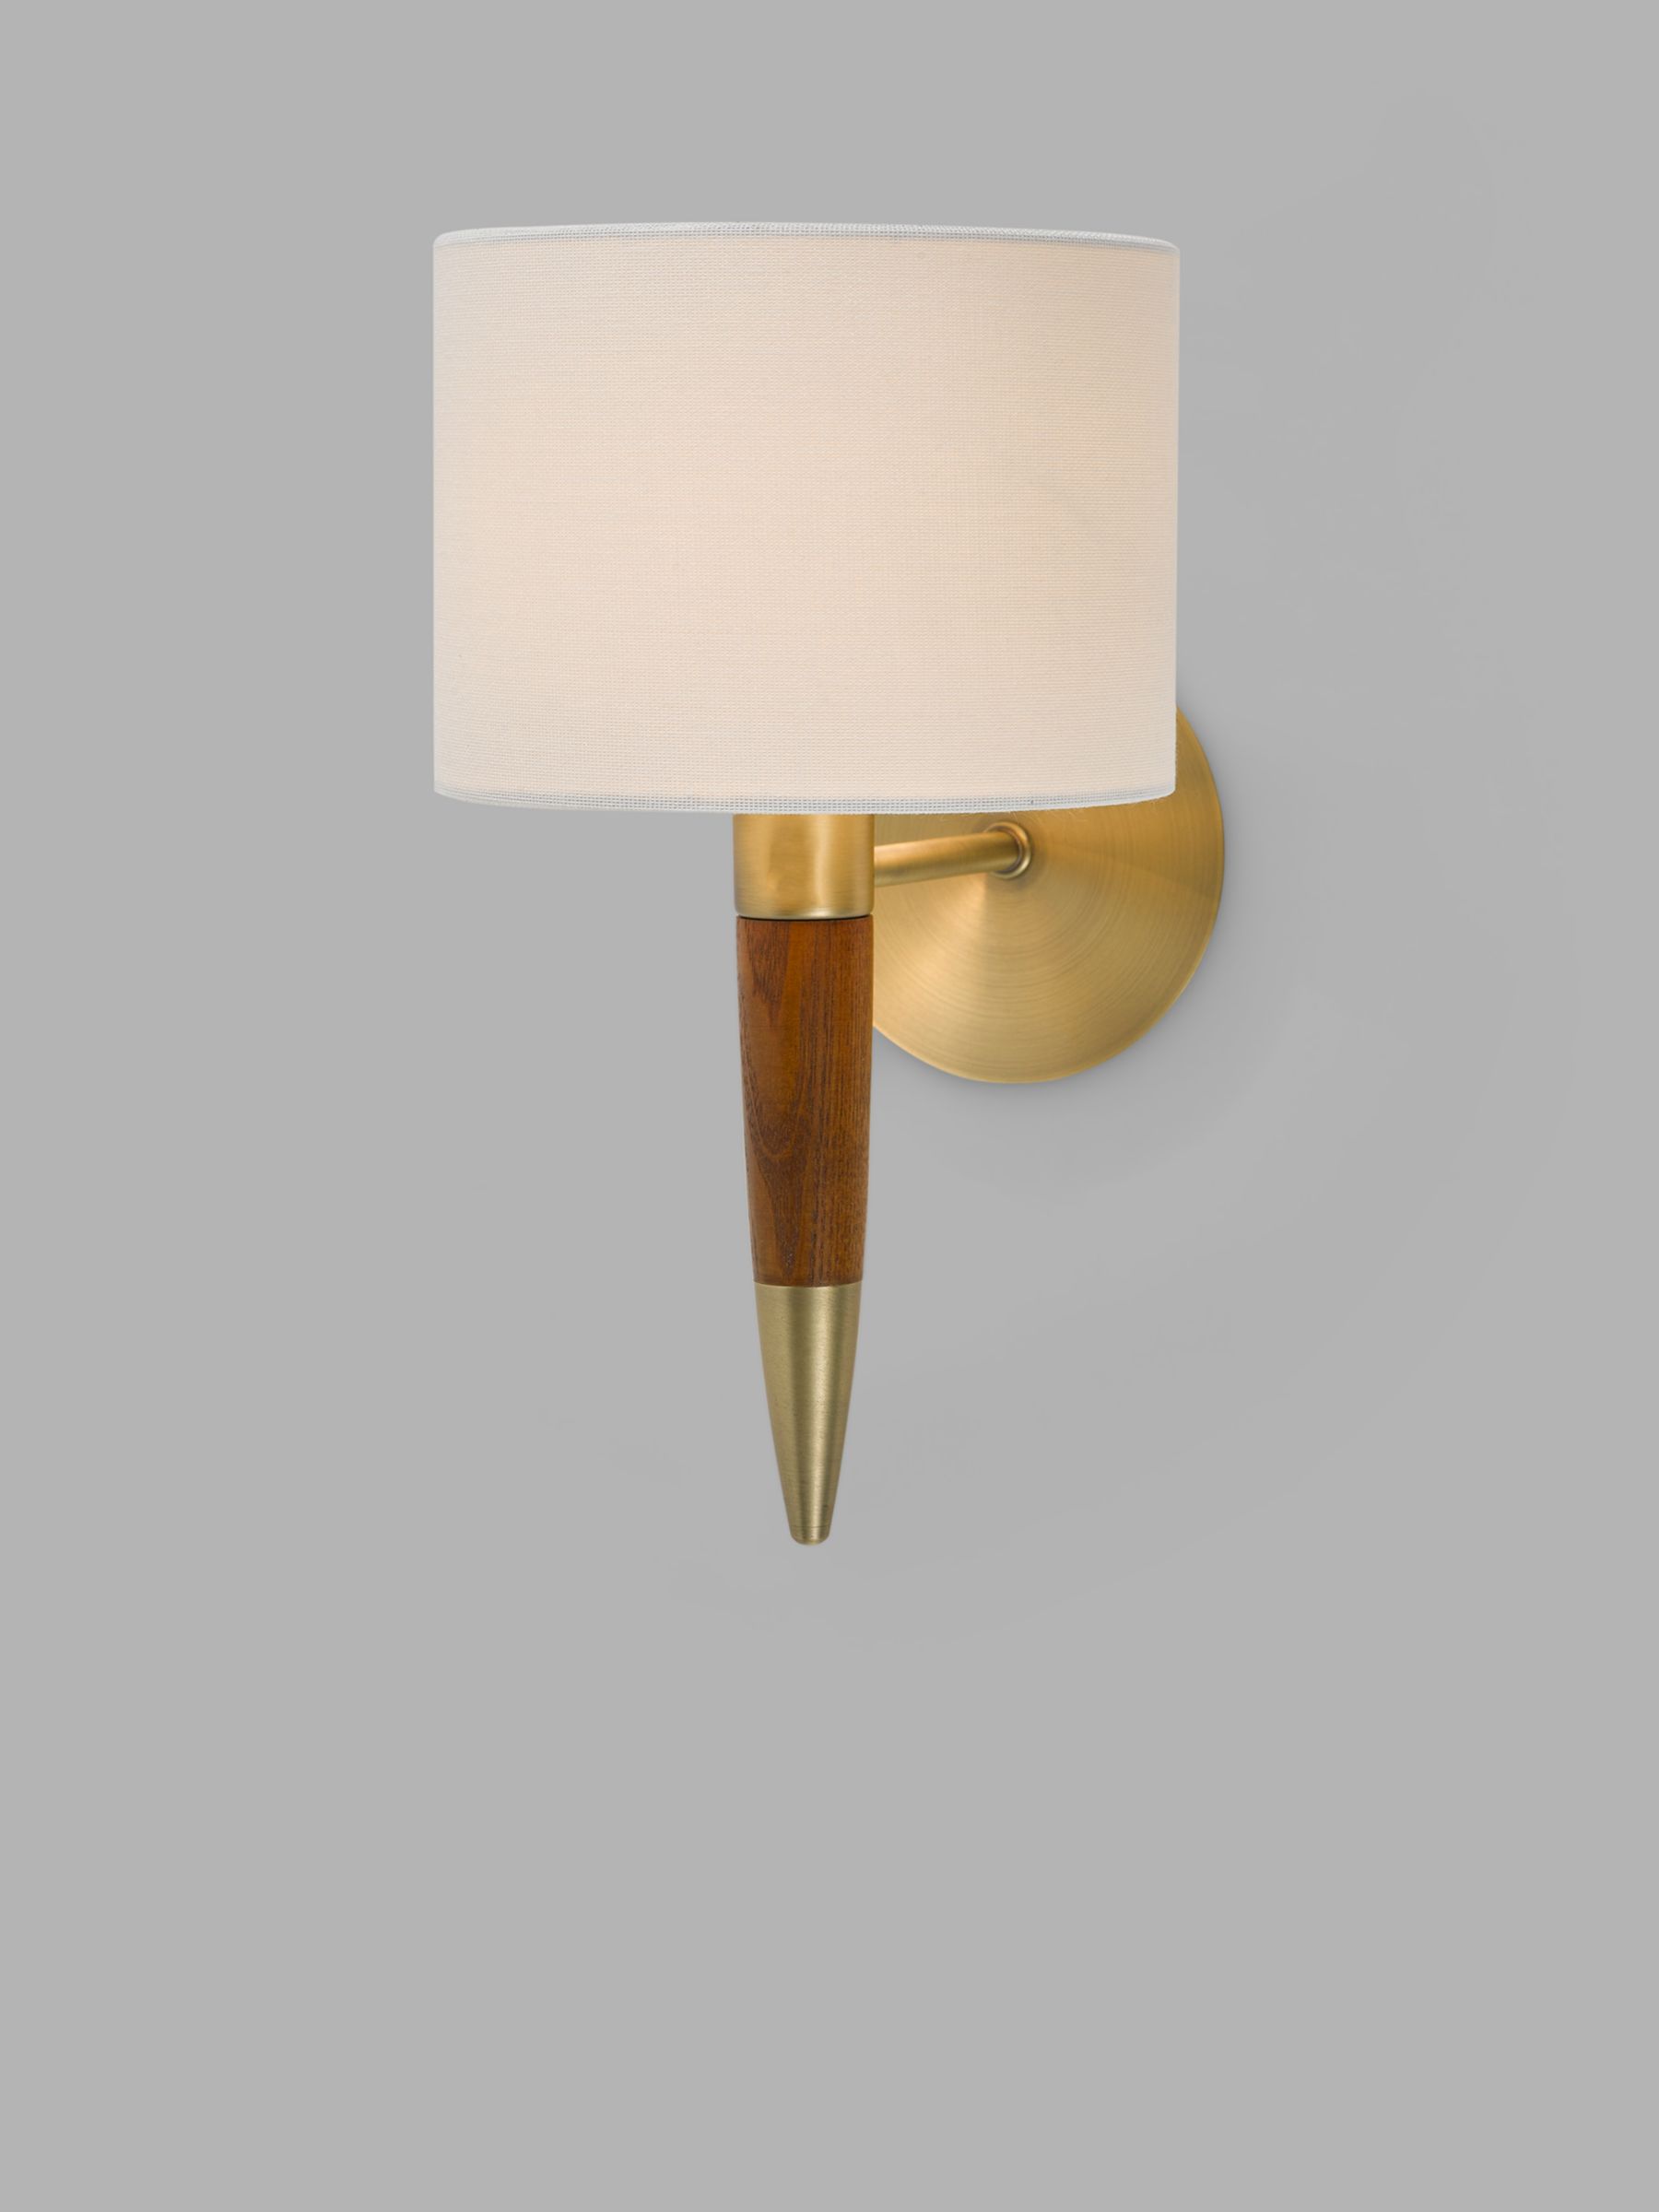 John Lewis Spindle Single Arm Wall Light, Antique Brass/Walnut Stained Ash